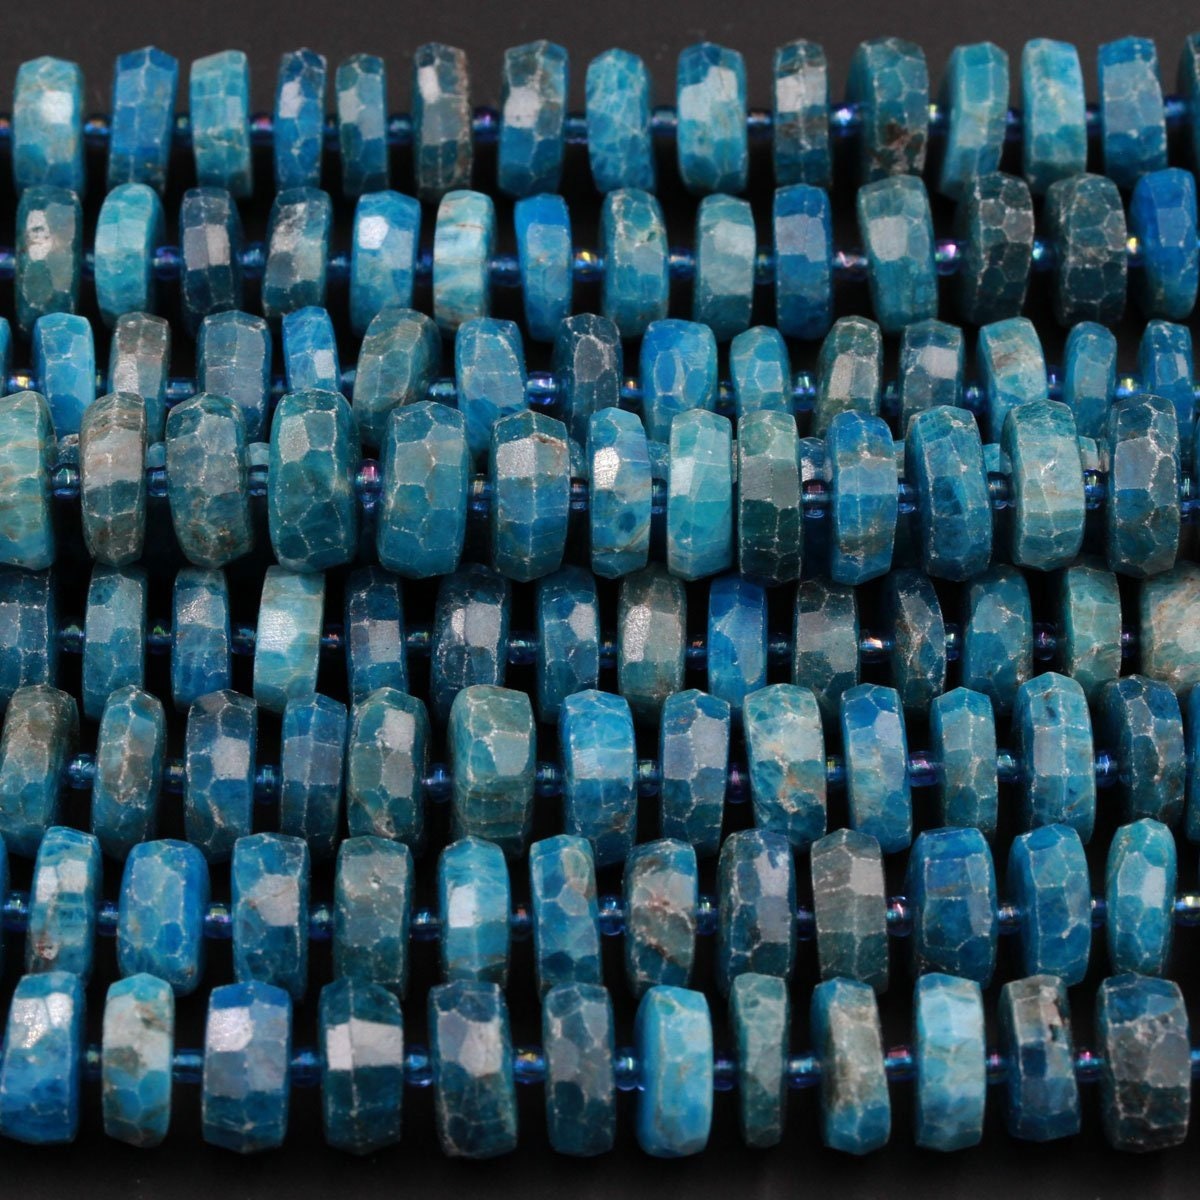 Natural Neon Blue Apatite Gemstone Faceted Rondelle Craft Beads Strand 14  3mm